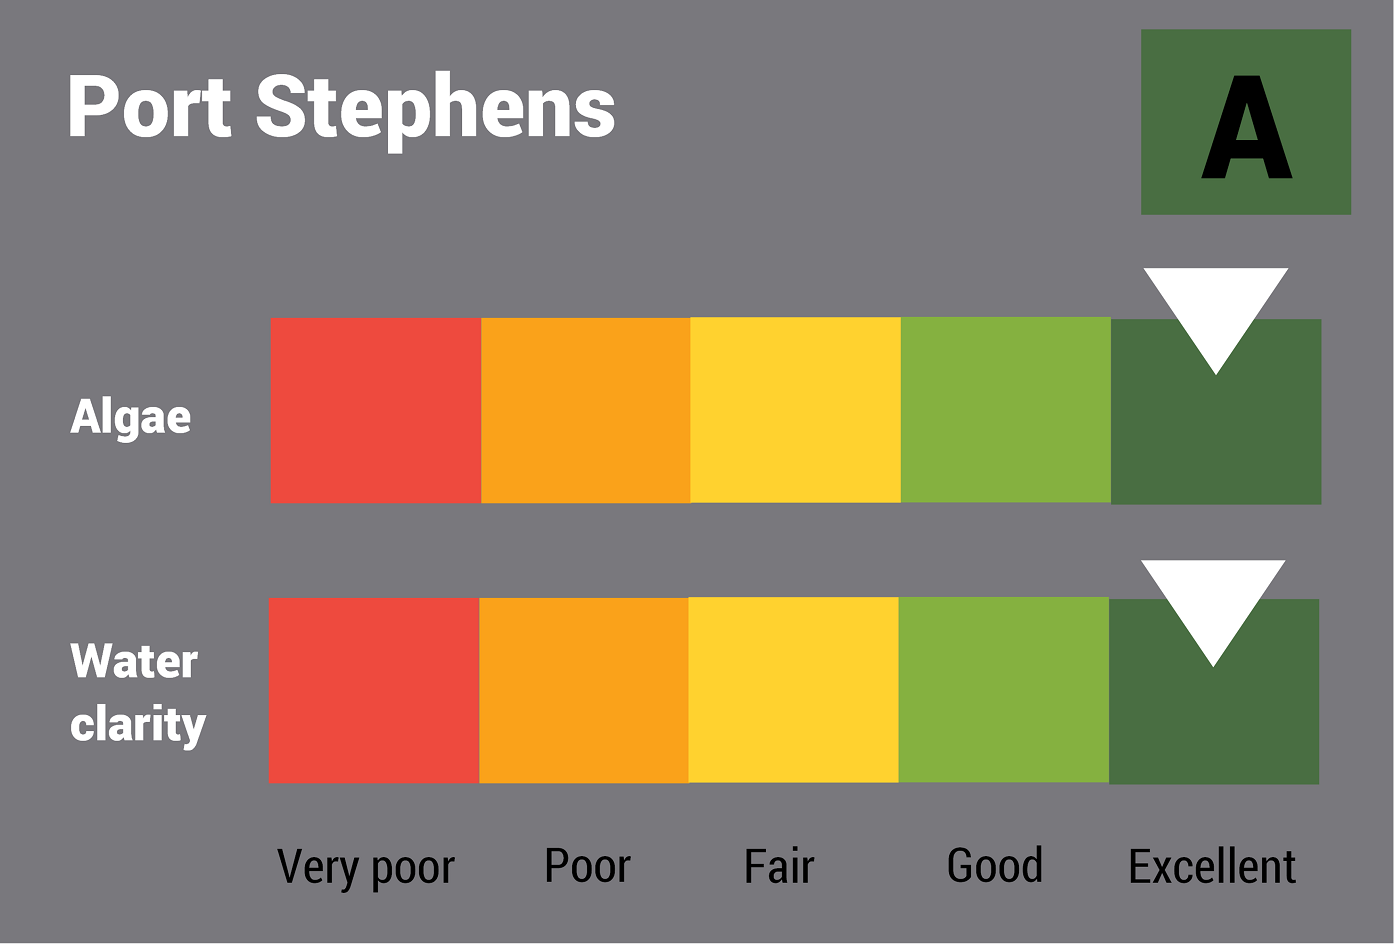 Port Stephens water quality report card for algae and water clarity showing colour-coded ratings (red, orange, yellow, light green and dark green, which represent very poor, poor, fair, good and excellent, respectively). Algae is rated 'excellent' and water clarity is rated 'excellent' giving an overall rating of 'excellent' or 'A'.